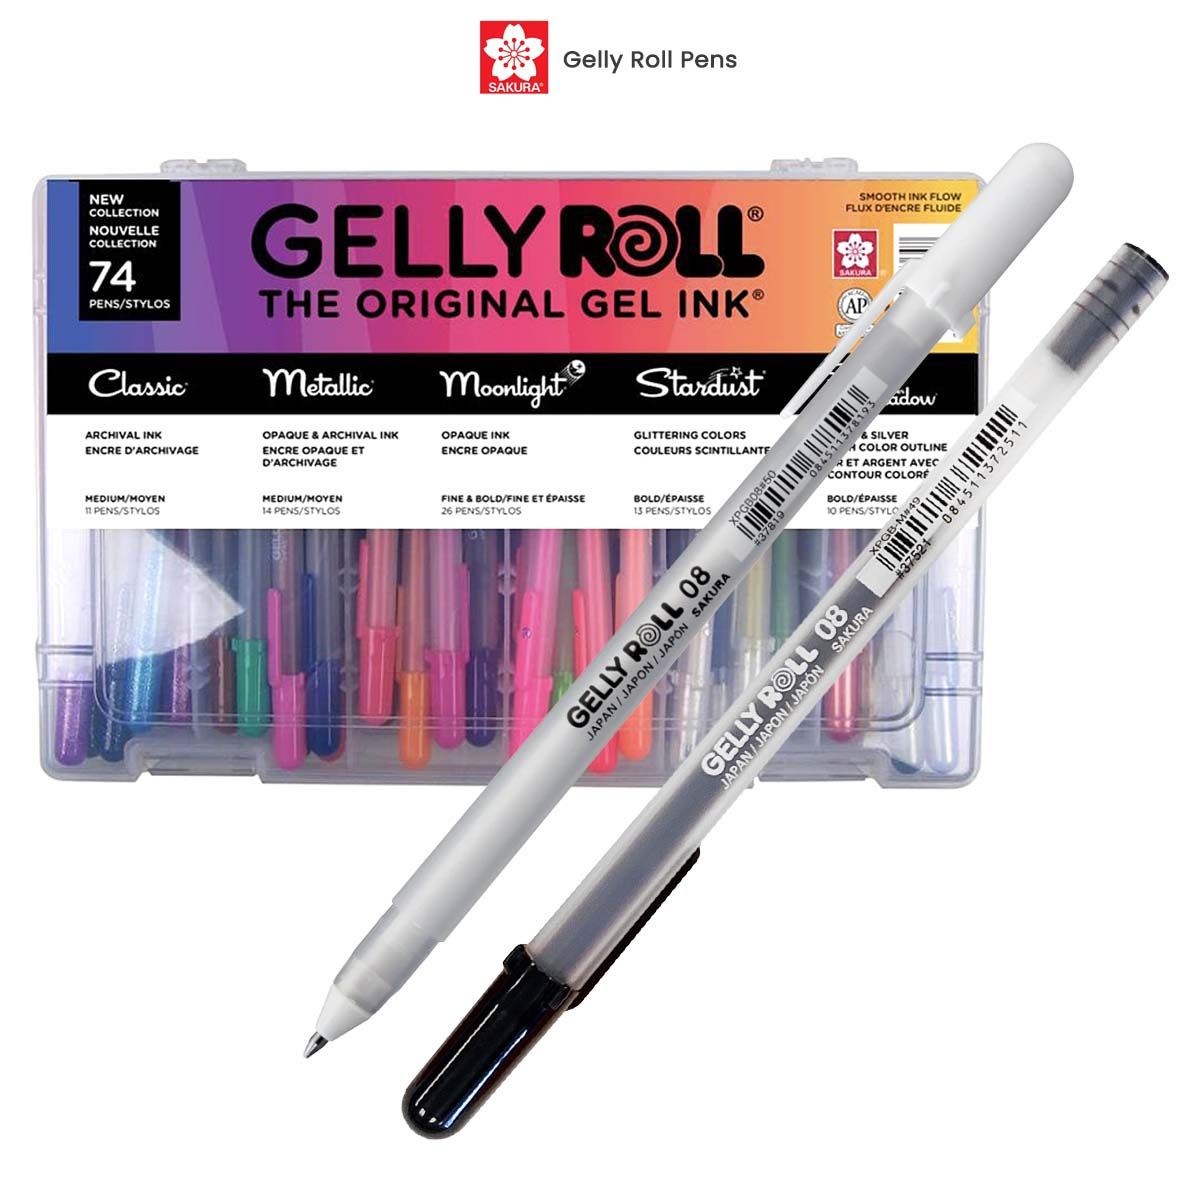 Gel Pens, Black Fine Point Gel Pen for Super Smooth Writing, 0.5mm  Retractable Pens with Quick-Drying Ink, Innovated Tip Tech (12 Pack)